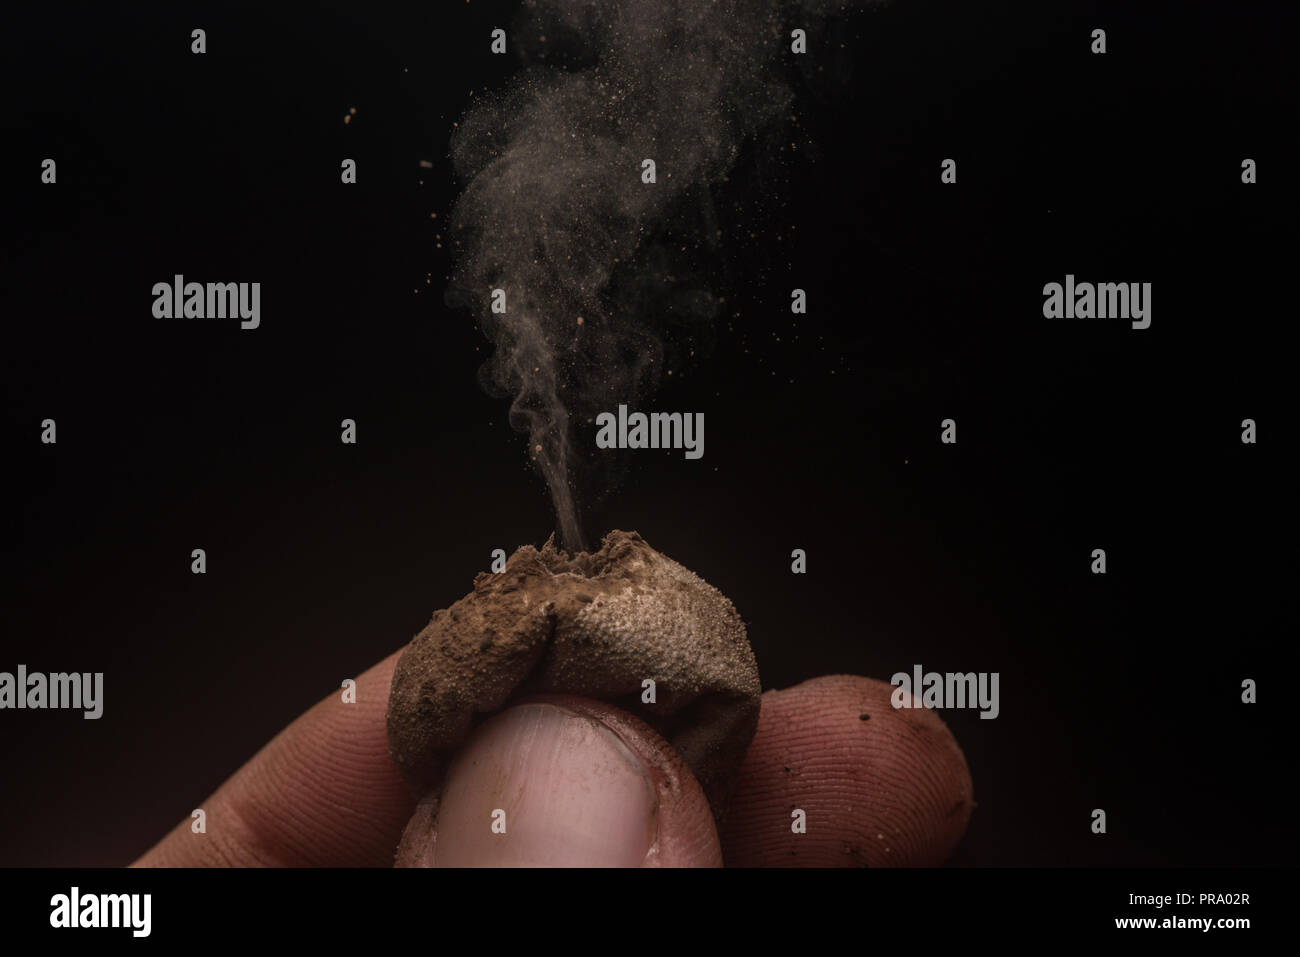 Puffball mushrooms releasing their spores in a cloud with a black background to emphasize details.  Photographed in Southern Wisconsin, USA. Stock Photo